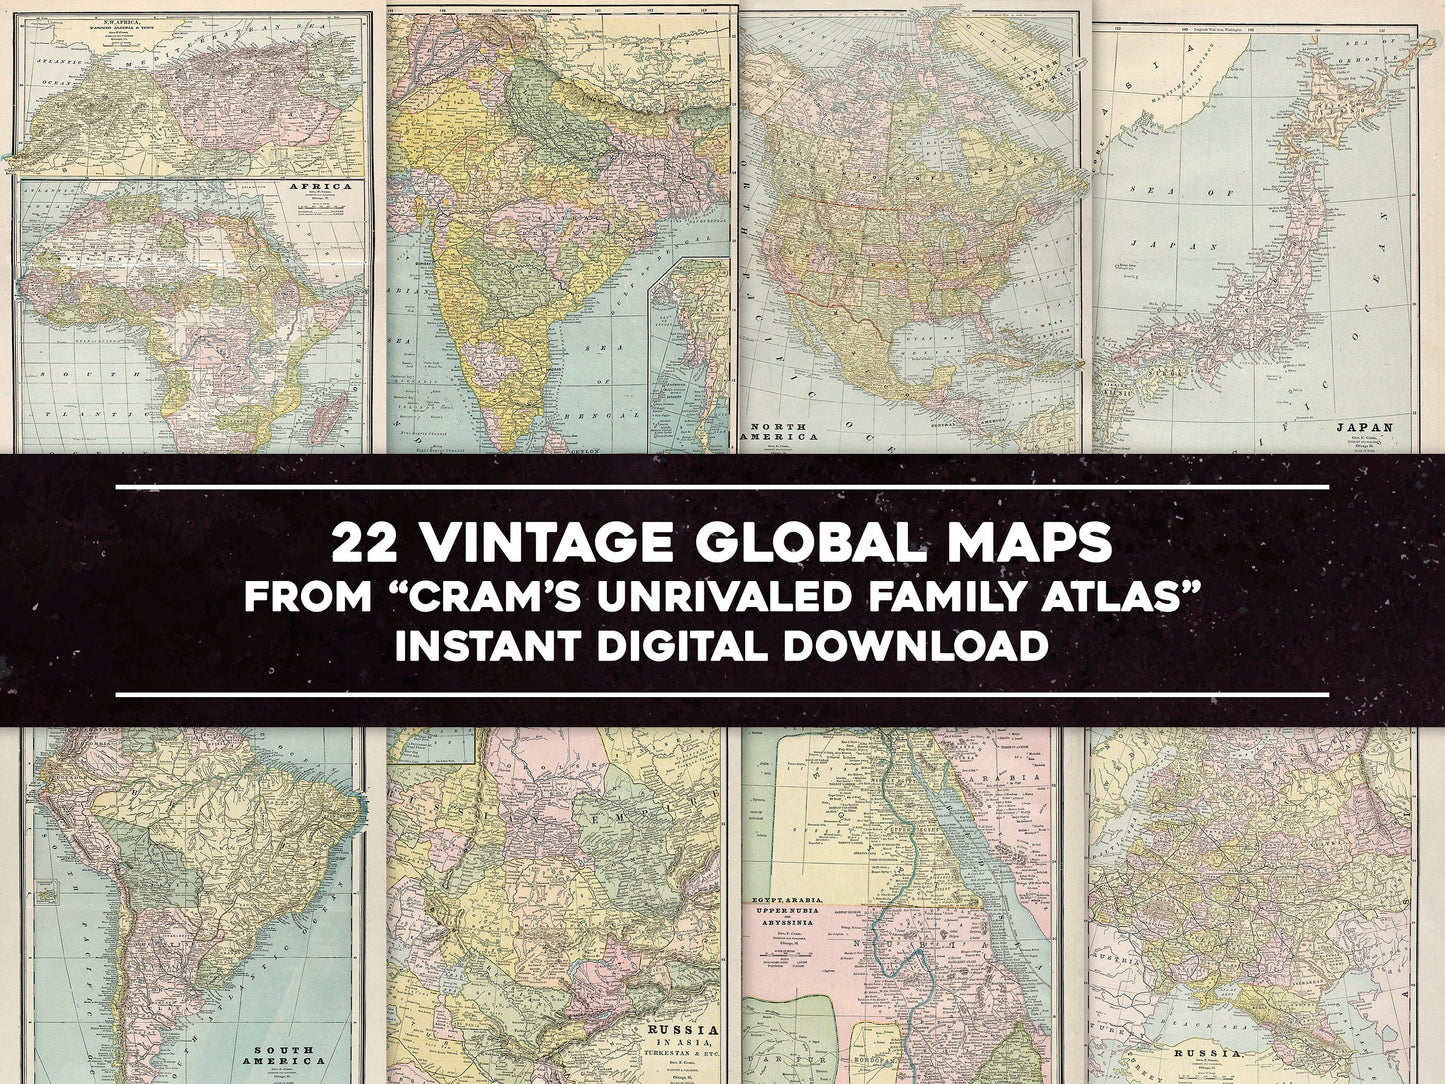 Cram's Unrivaled Family Atlas of the World Countries [22 Images]